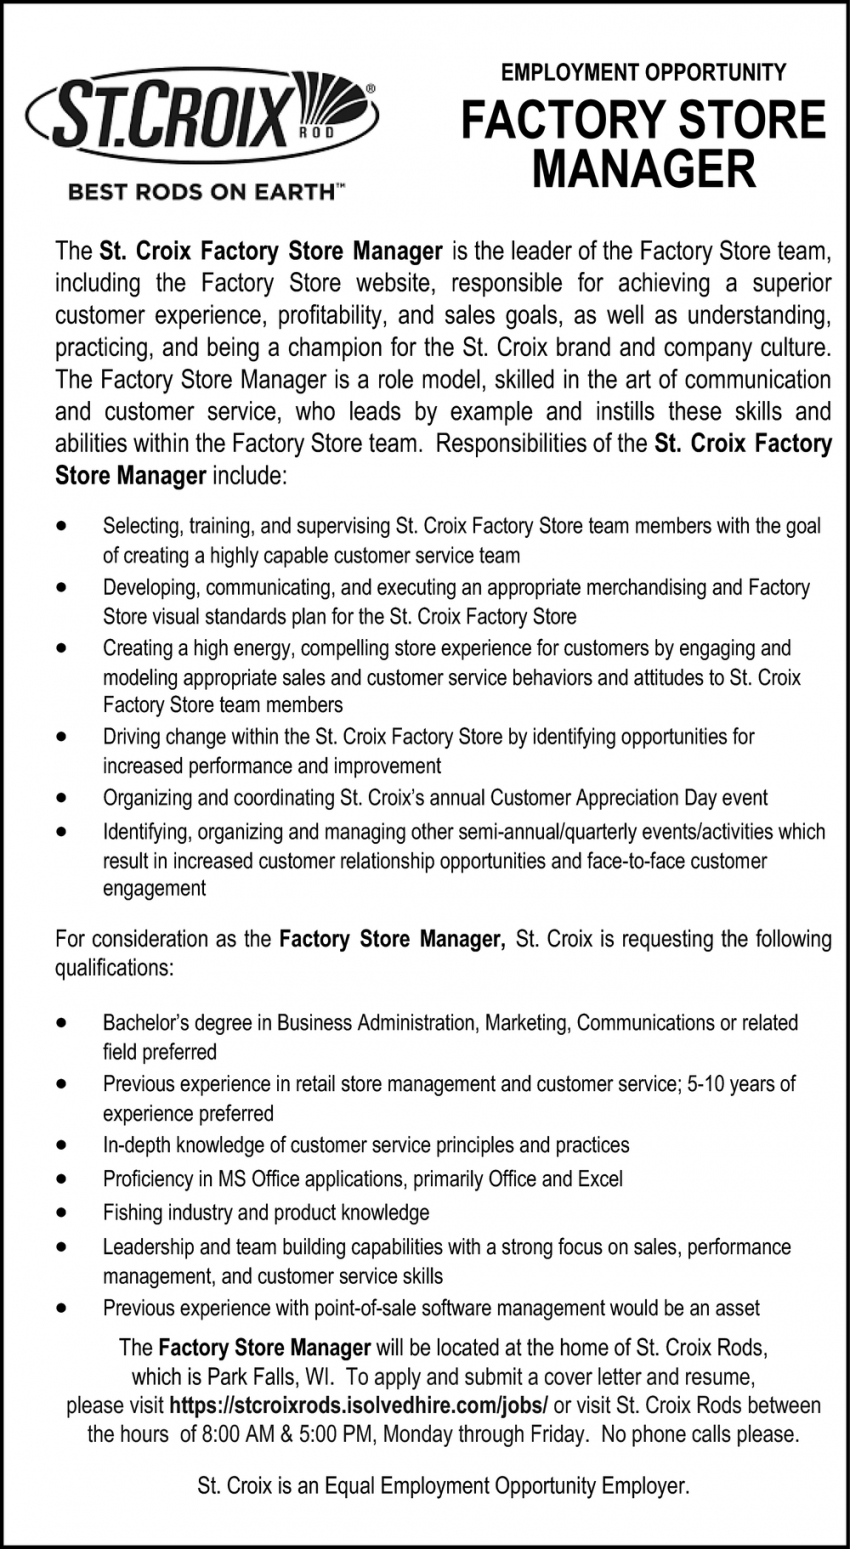 Factory Store Manager, St. Croix Rod, Park Falls, WI